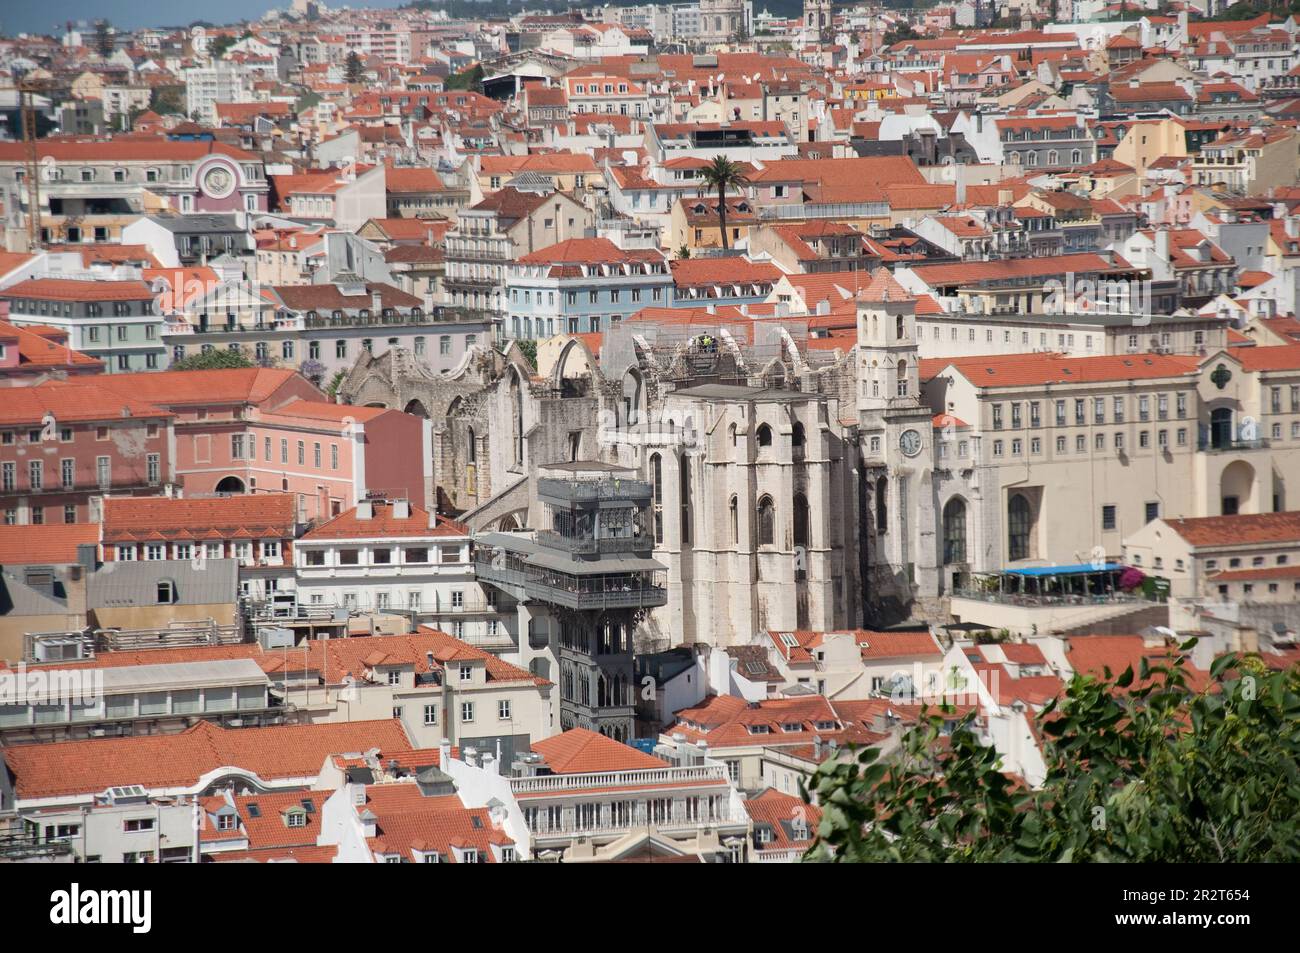 View from St George's Castle - rooftops, St Justs's Lift, Carmo Convent, River Tagus, Lisbon, Portugal Stock Photo